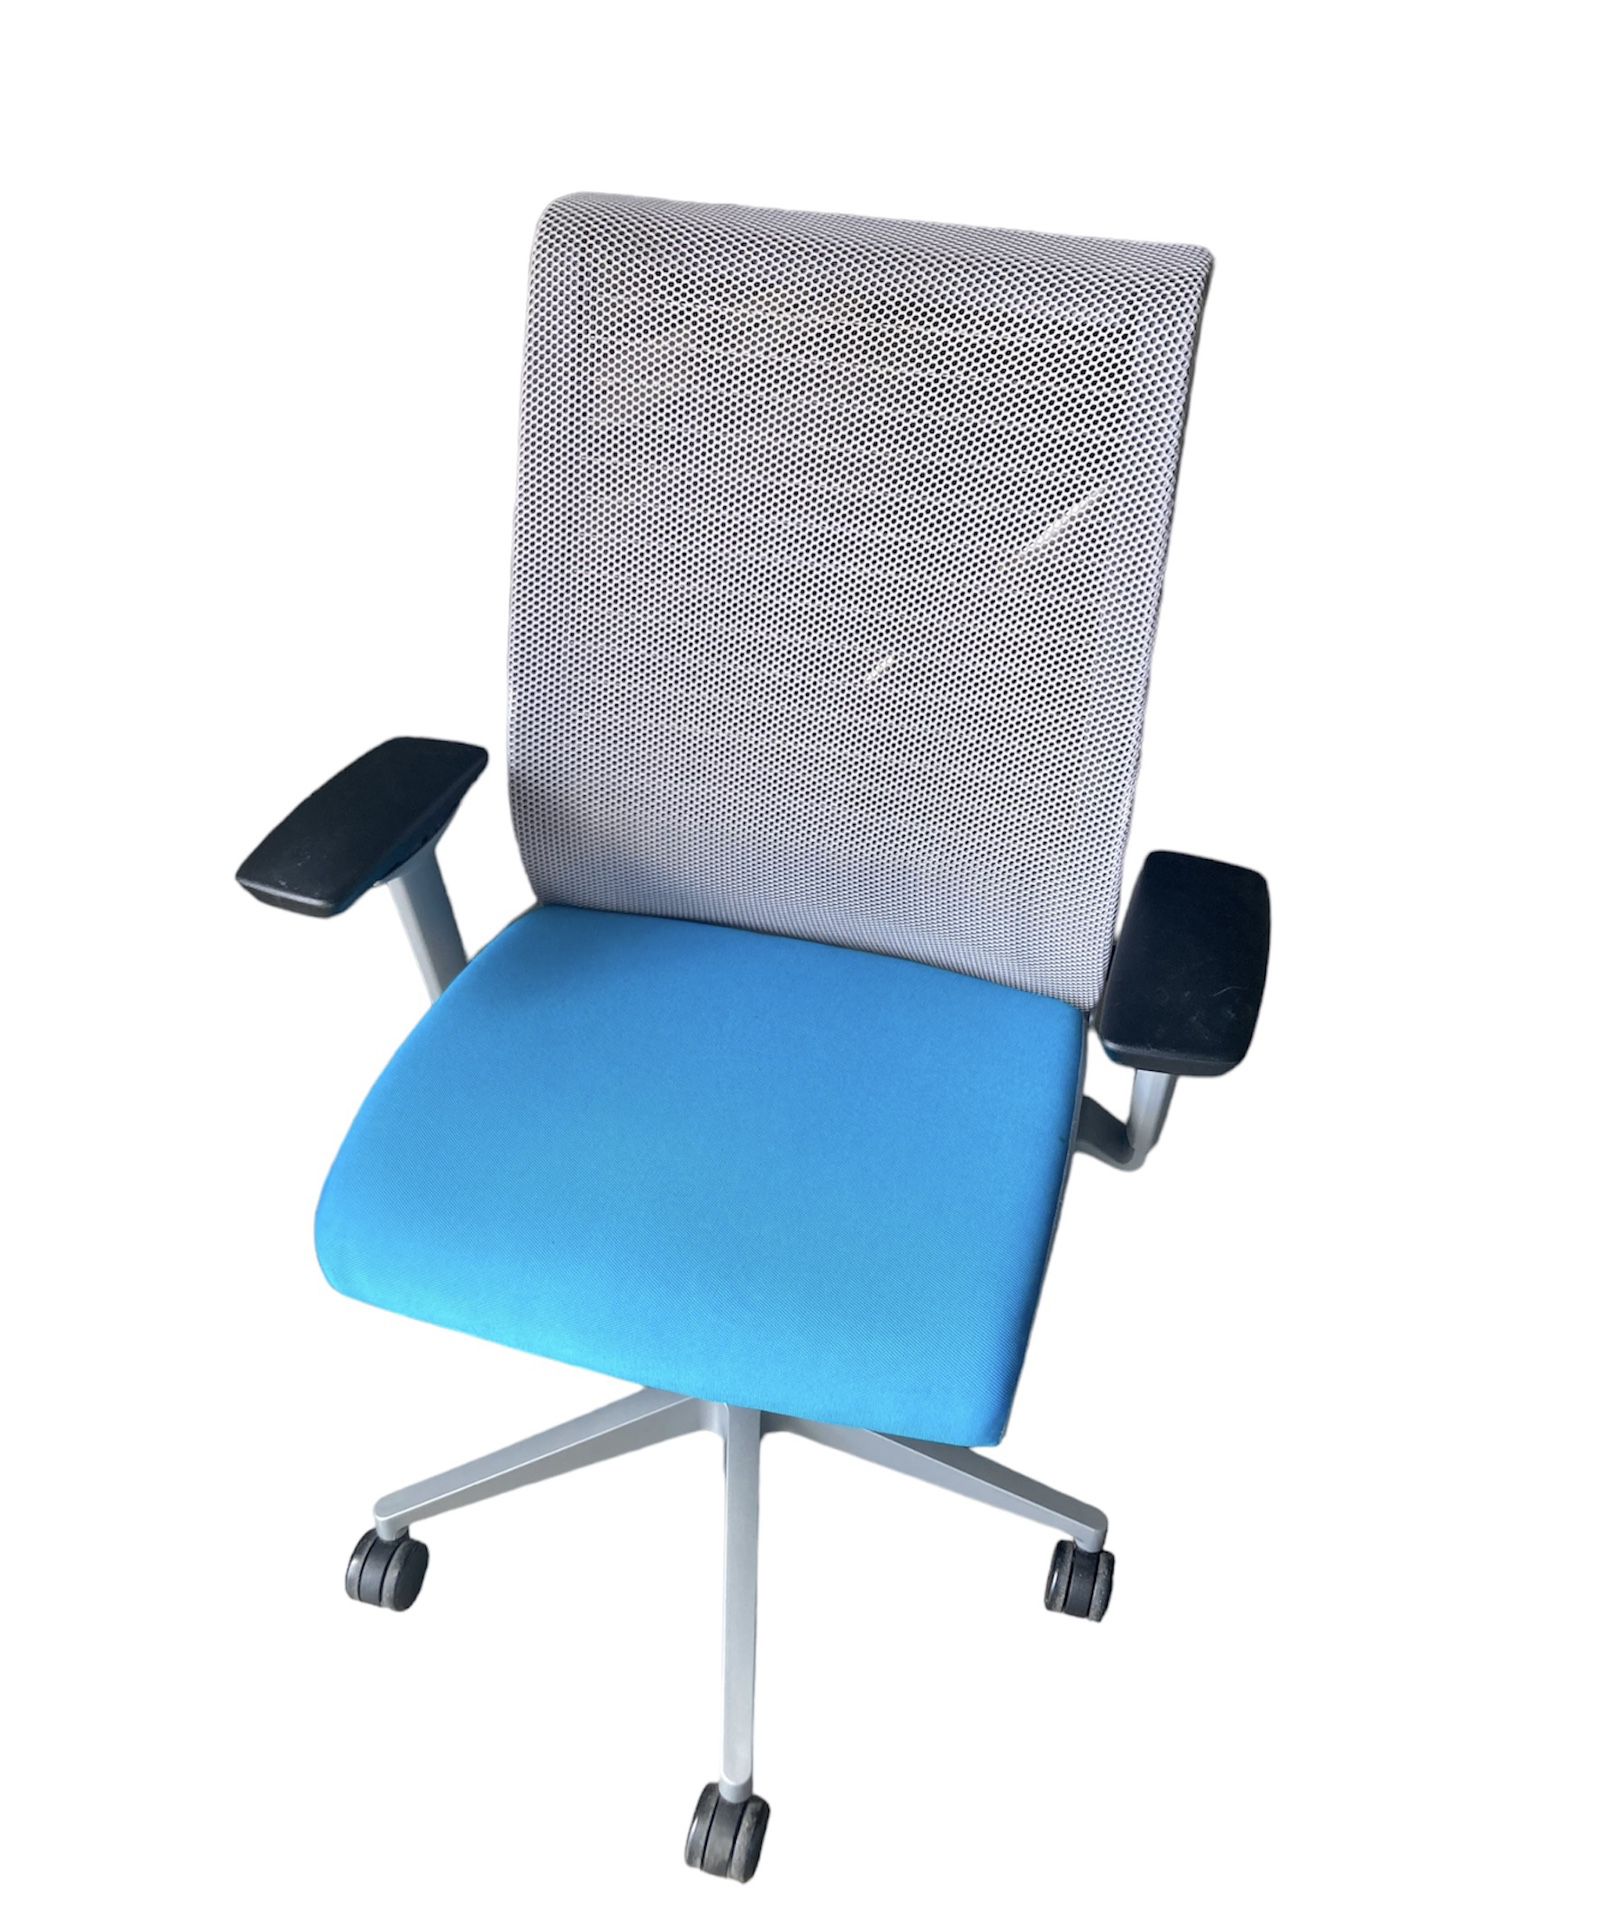 Office Furniture Steelcase Think Chair Starting From $249.99 and Up